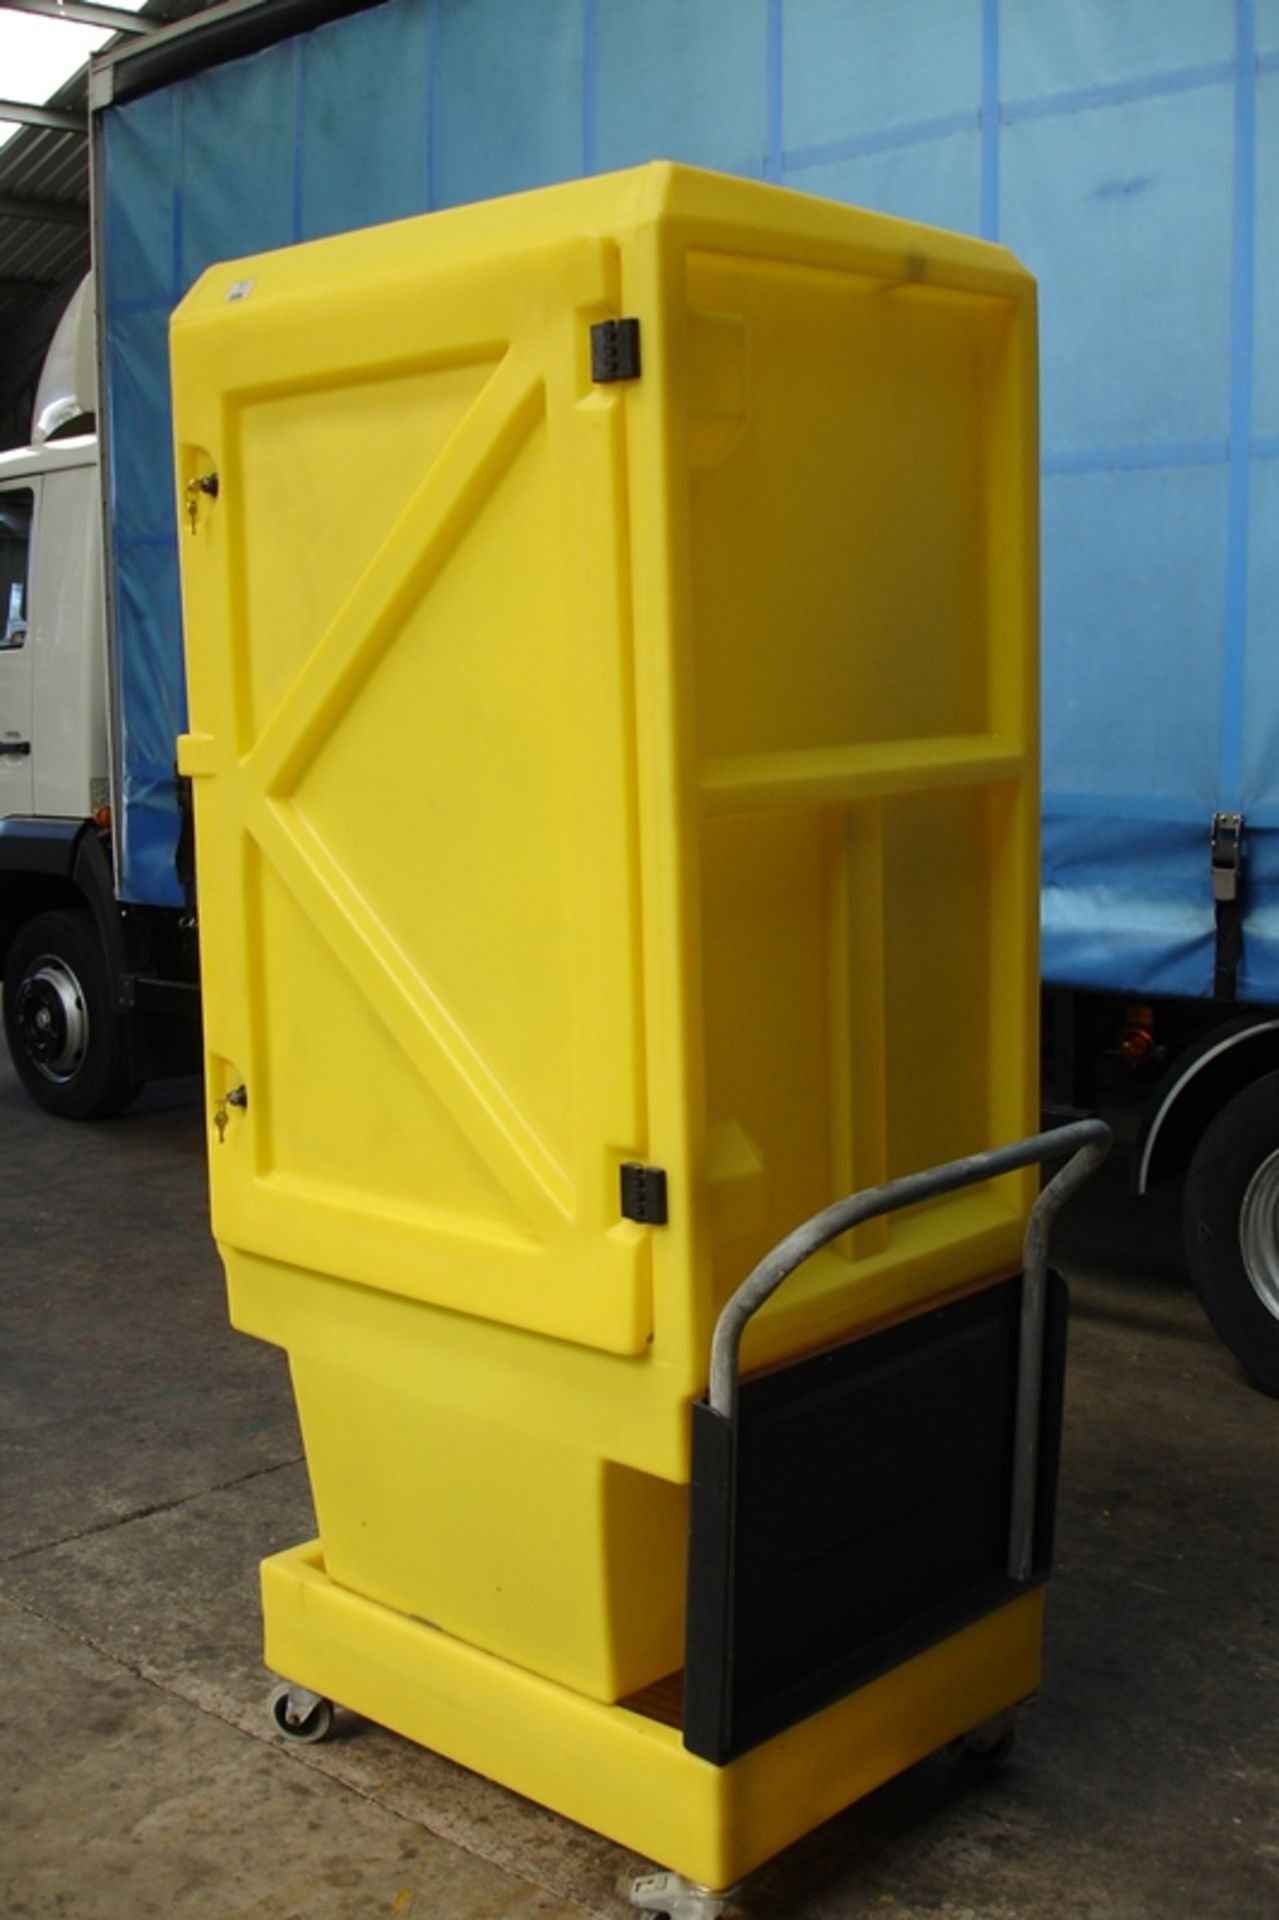 Mobile storage unit for PPE Clothing etc - Image 2 of 3